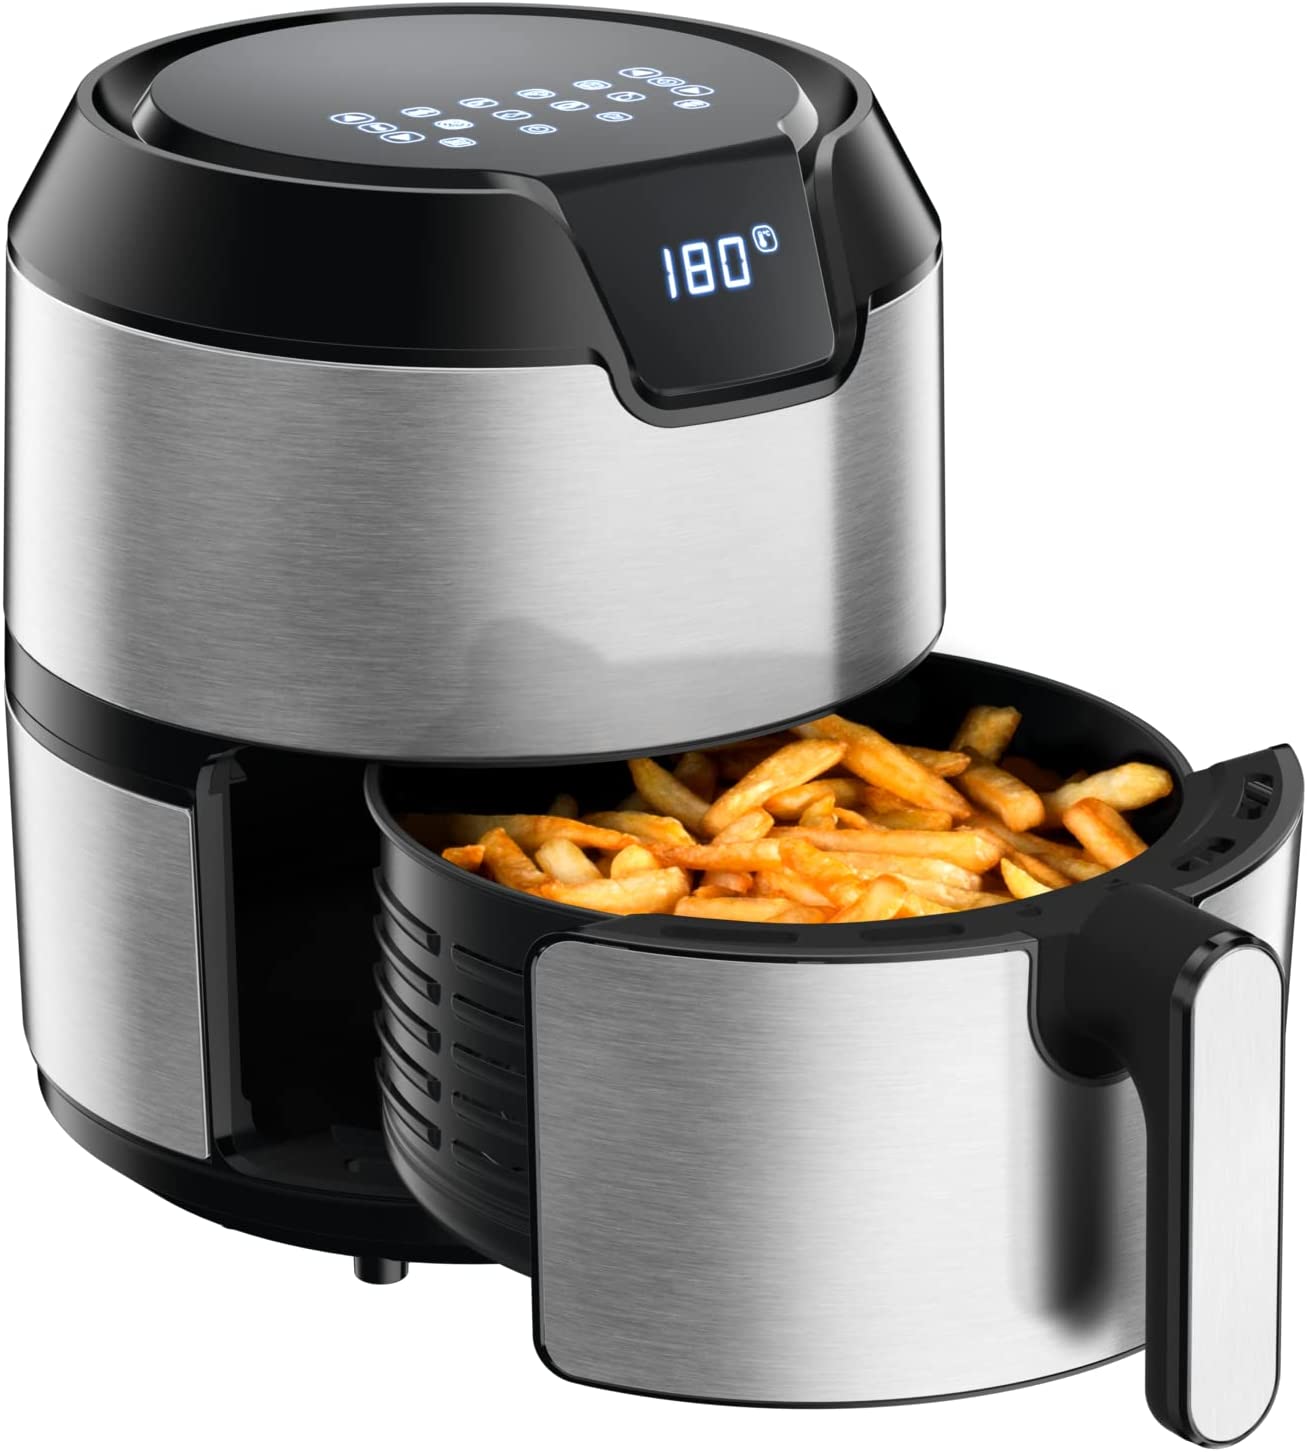 Moulinex Easy Fry Deluxe EZ401D Oil Fryer for Healthy Preparations, Cold Hot Air, Compact Design, Temperature Setting, Timer, 8 Menus, Air Pulse